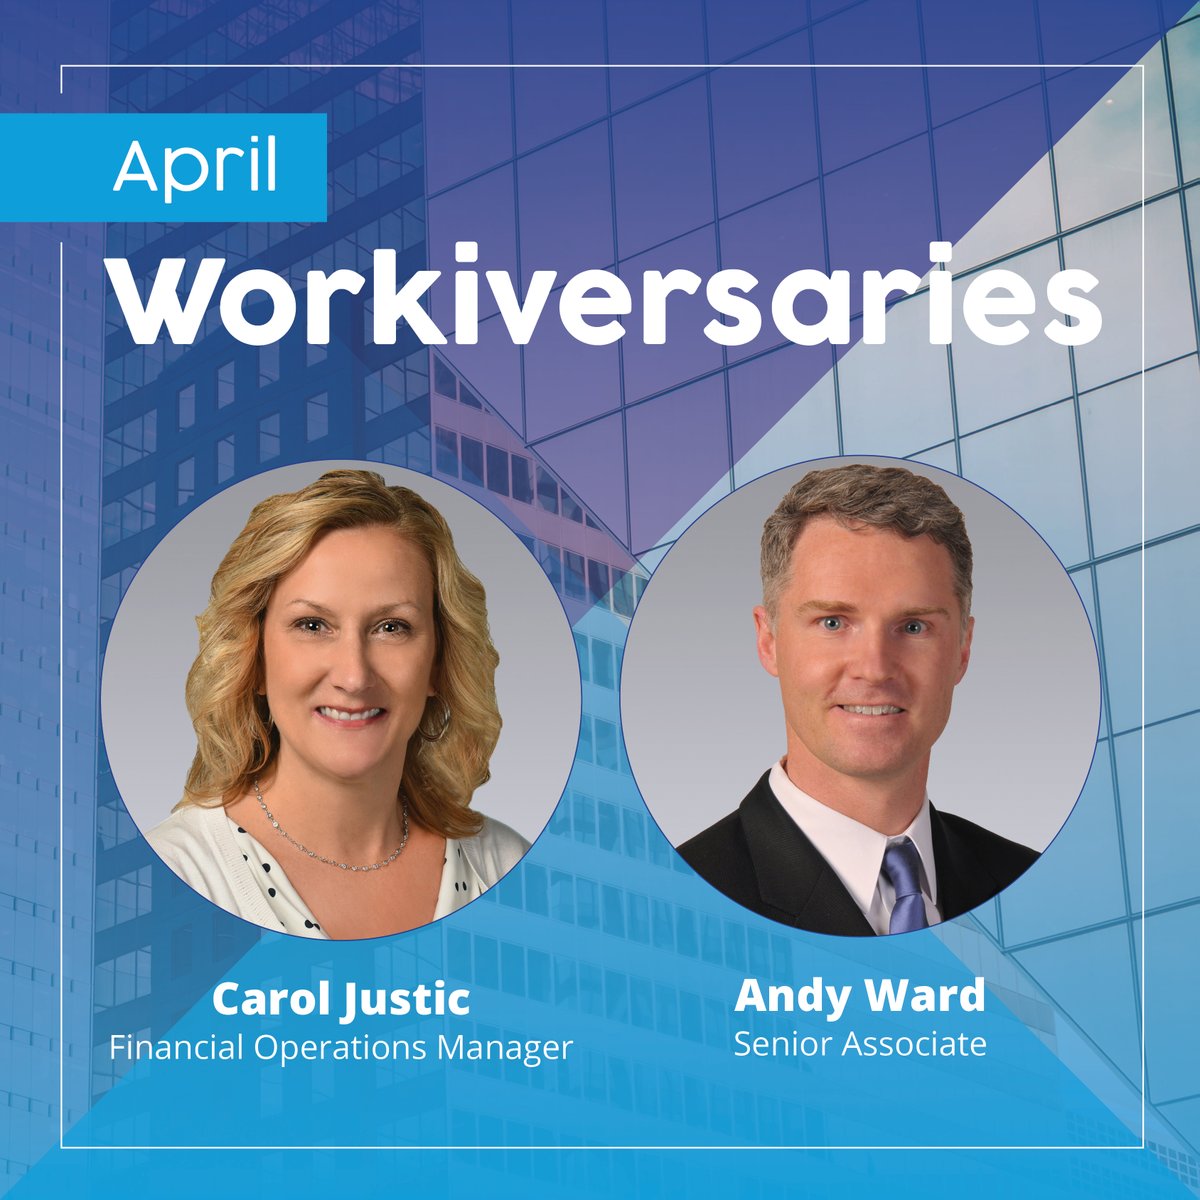 Happy #Workiversary to Carol Justic & Andy Ward! 🎉
#Workanniversary #LoveColliers #team #thankyou